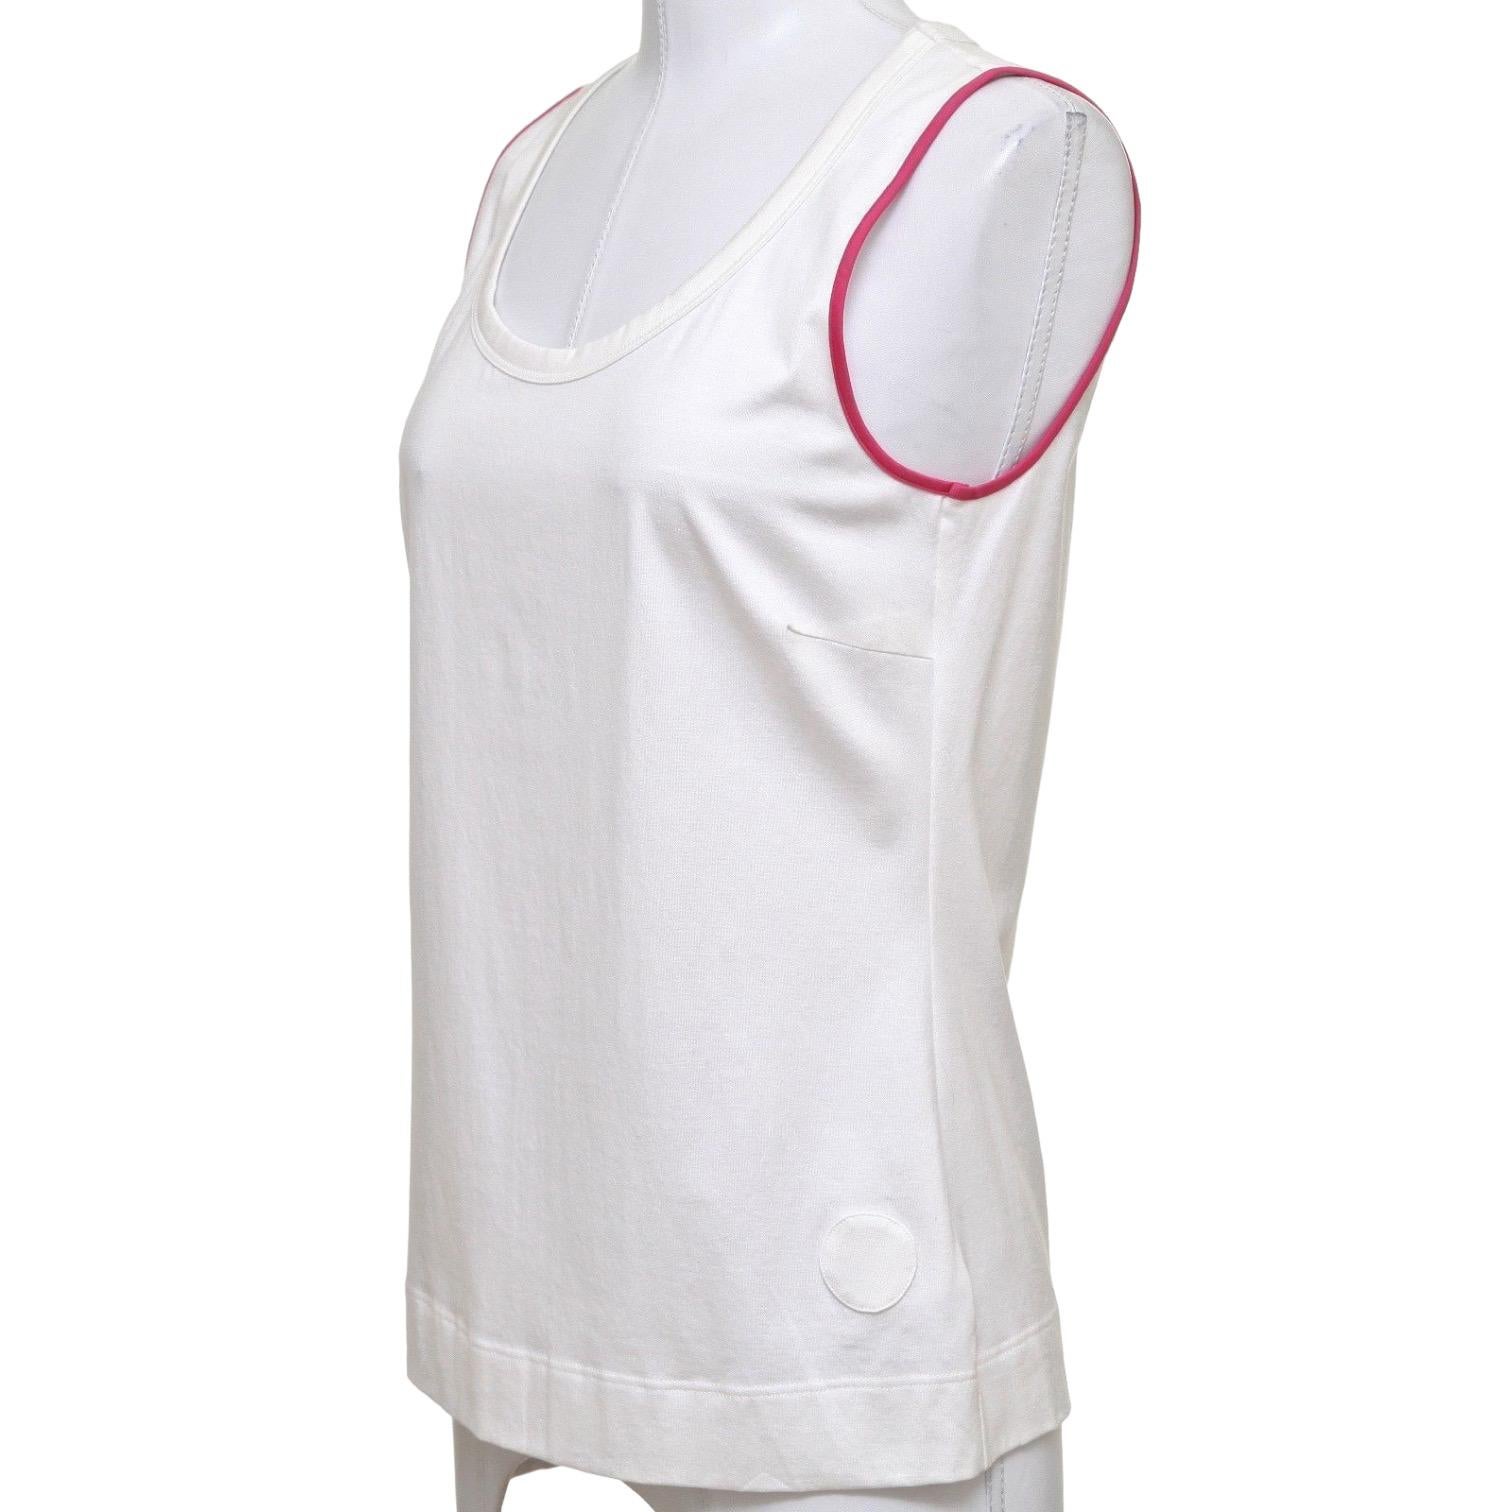 GUARANTEED AUTHENTIC VERSATILE AKRIS PUNTO COTTON BLEND TANK TOP

Design:
• Beautiful off white with magenta trim sleeveless top.
• Rounded neckline, slip on.
• Versatile and lightweight.

Size: 10

Material: 95% Cotton, 5% Elastane

Measurements